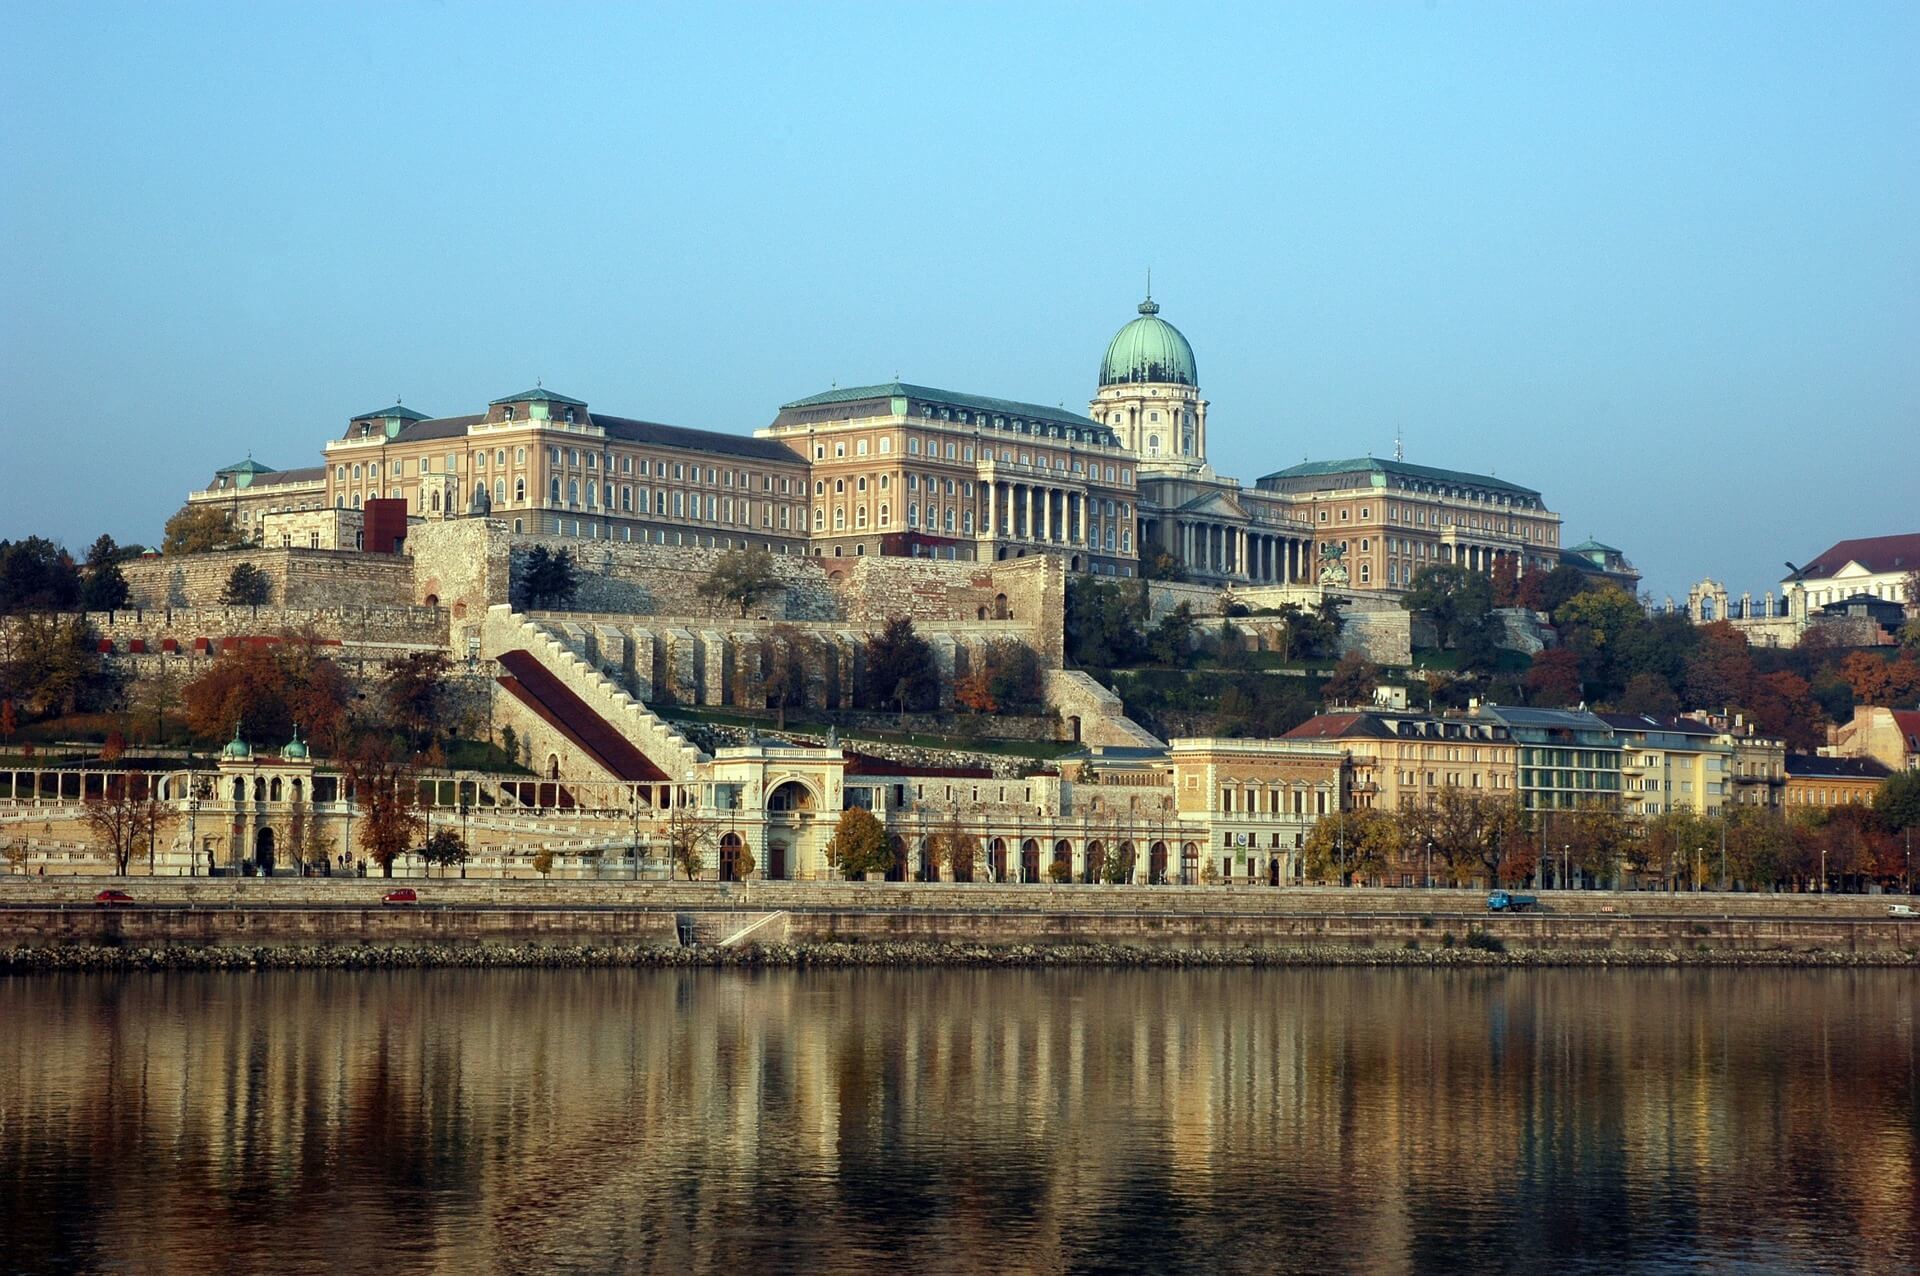 View of Varkerulet, Budapest from across the lake.